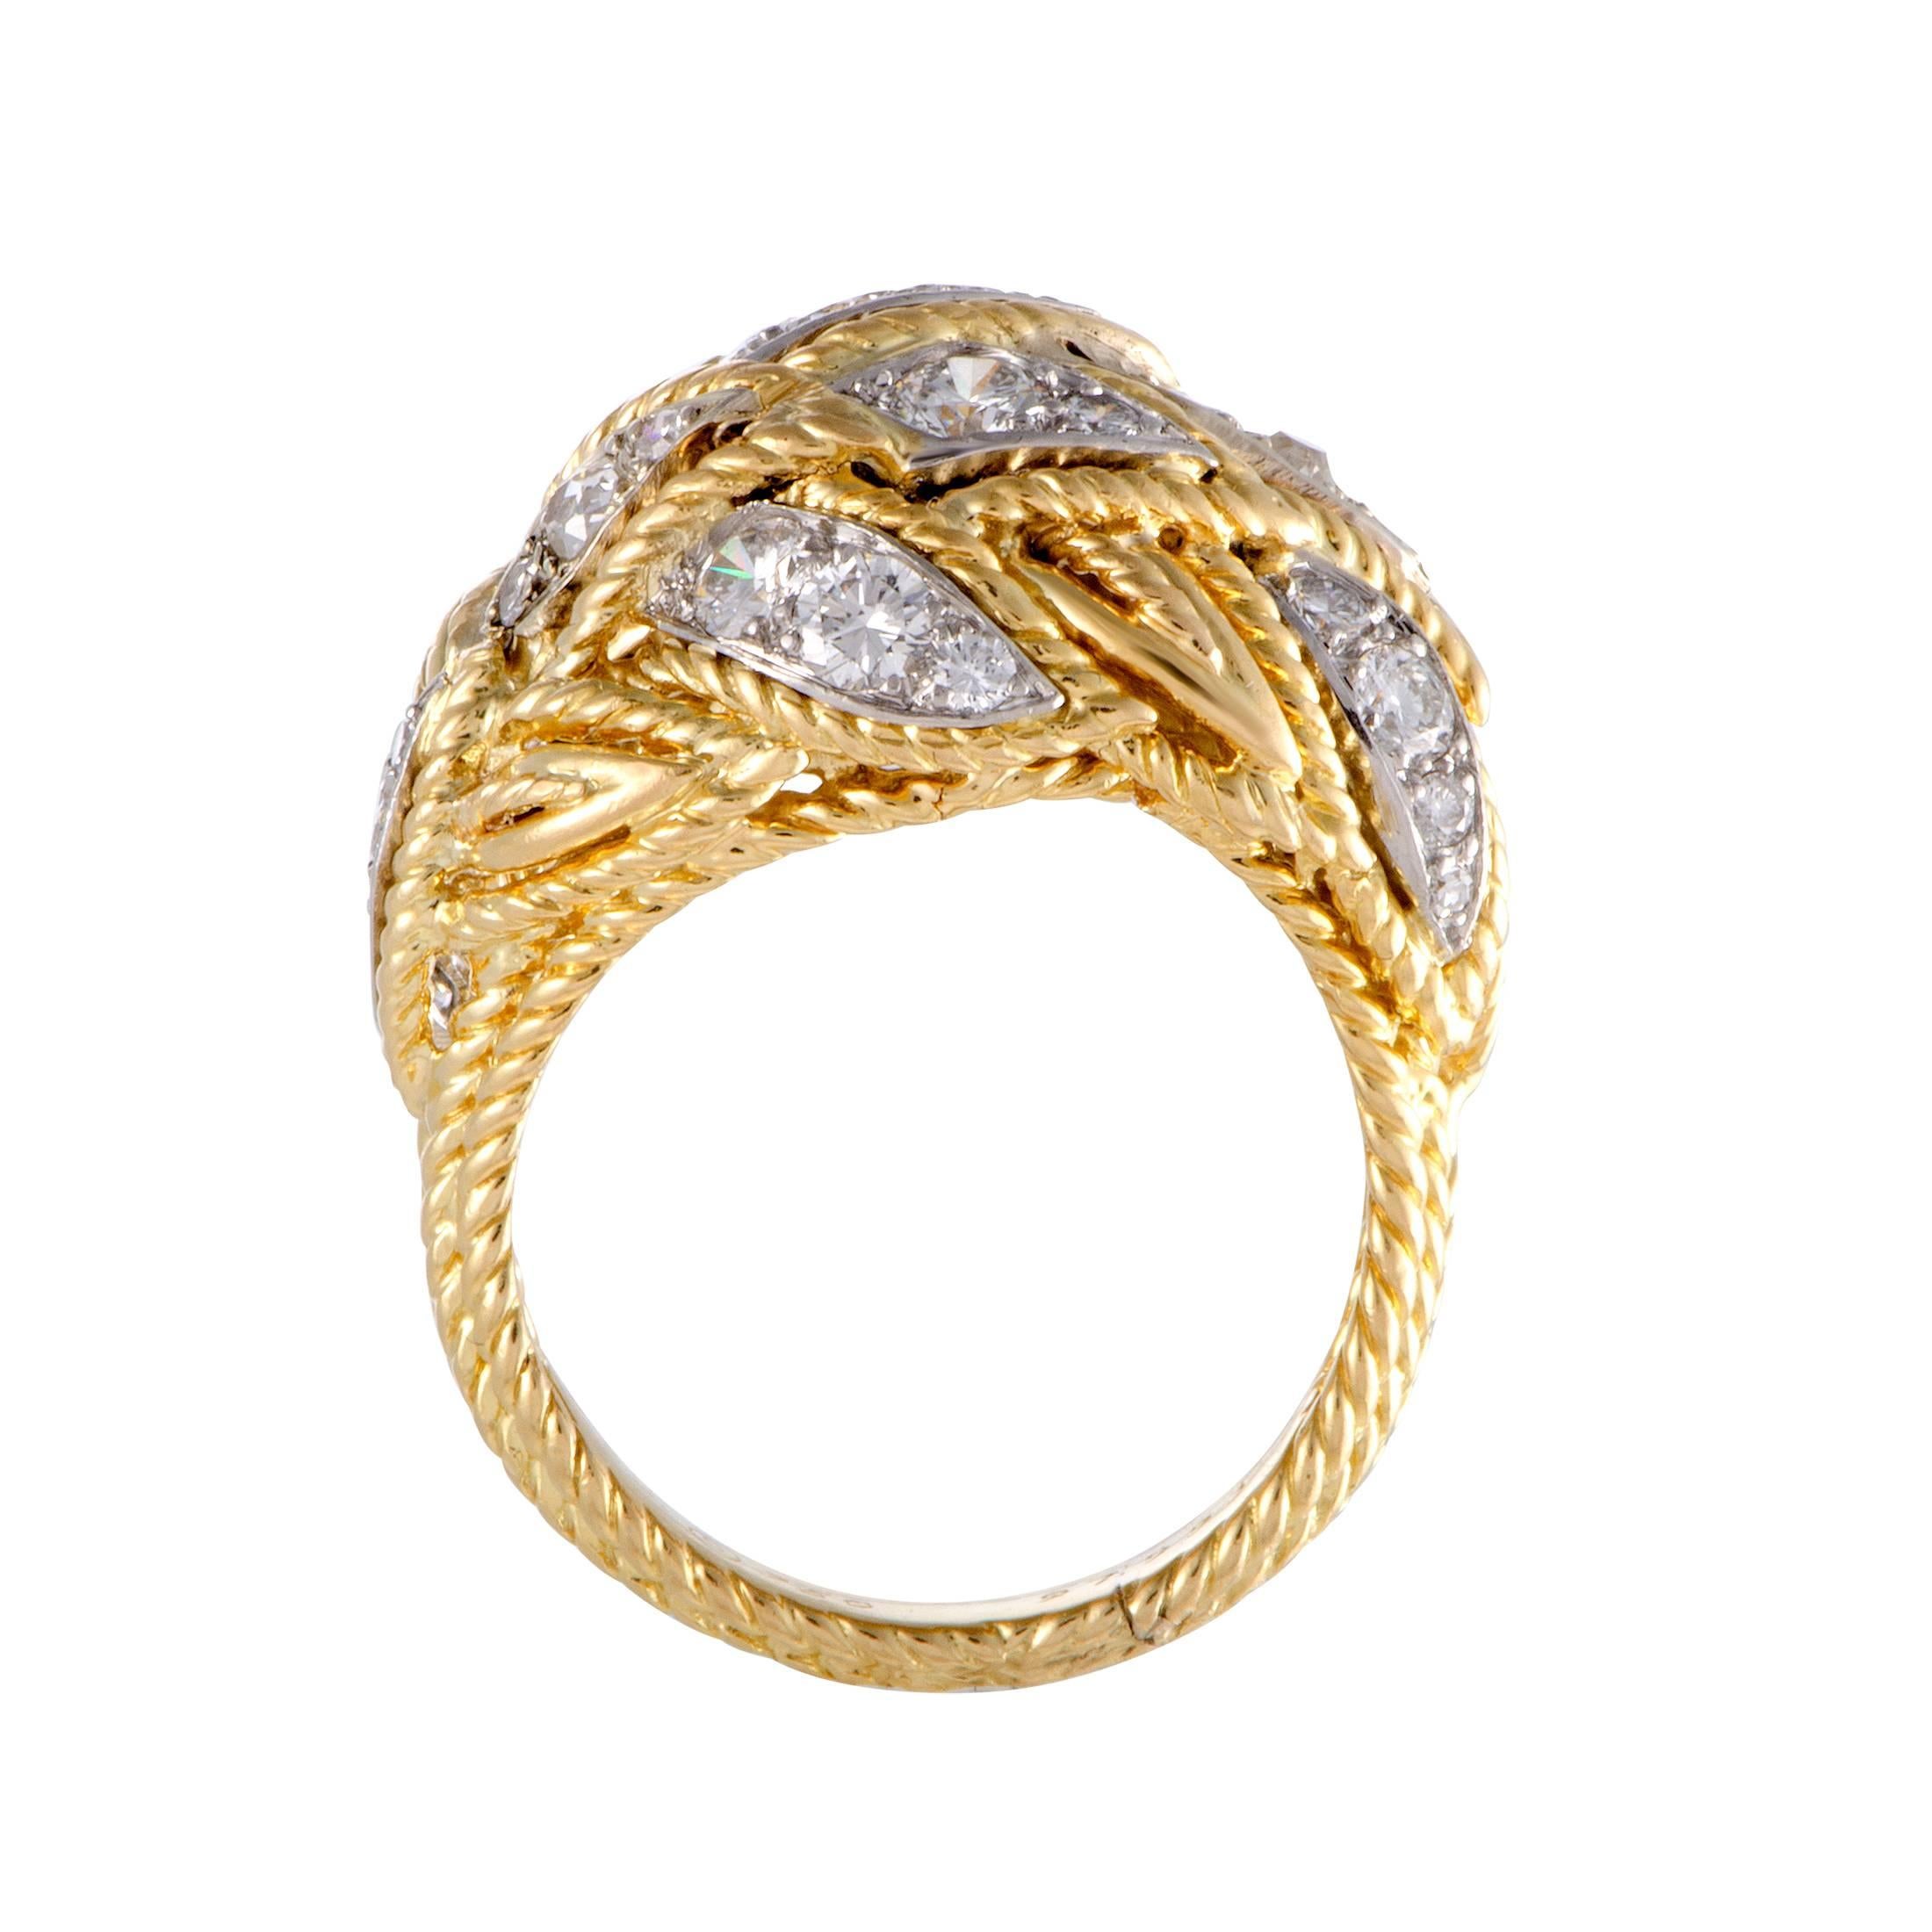 The luxurious radiance of 18K yellow gold and the alluring brilliance of diamond stones produce an incredibly sophisticated aesthetic effect in this vintage piece. The ring is a Van Cleef & Arpels design and it is decorated with a total of 1.00